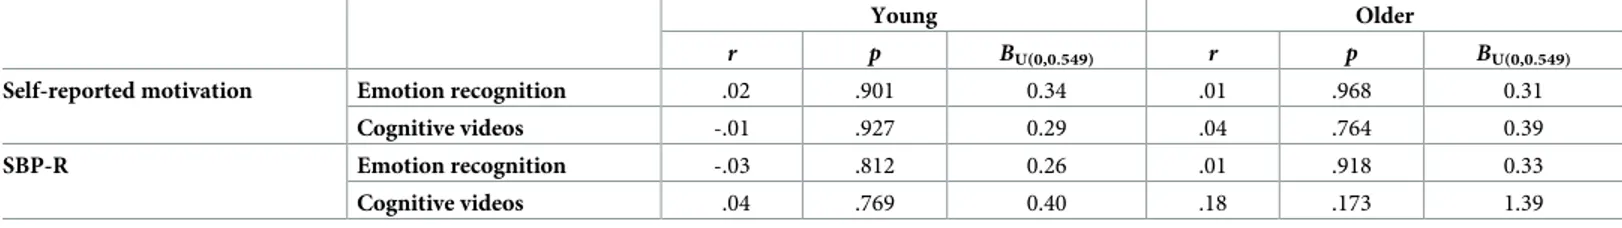 Table 3. Pearson’s r, p values and bayes factors for correlation analyses among motivation and social-cognitive performance, separated by age group.